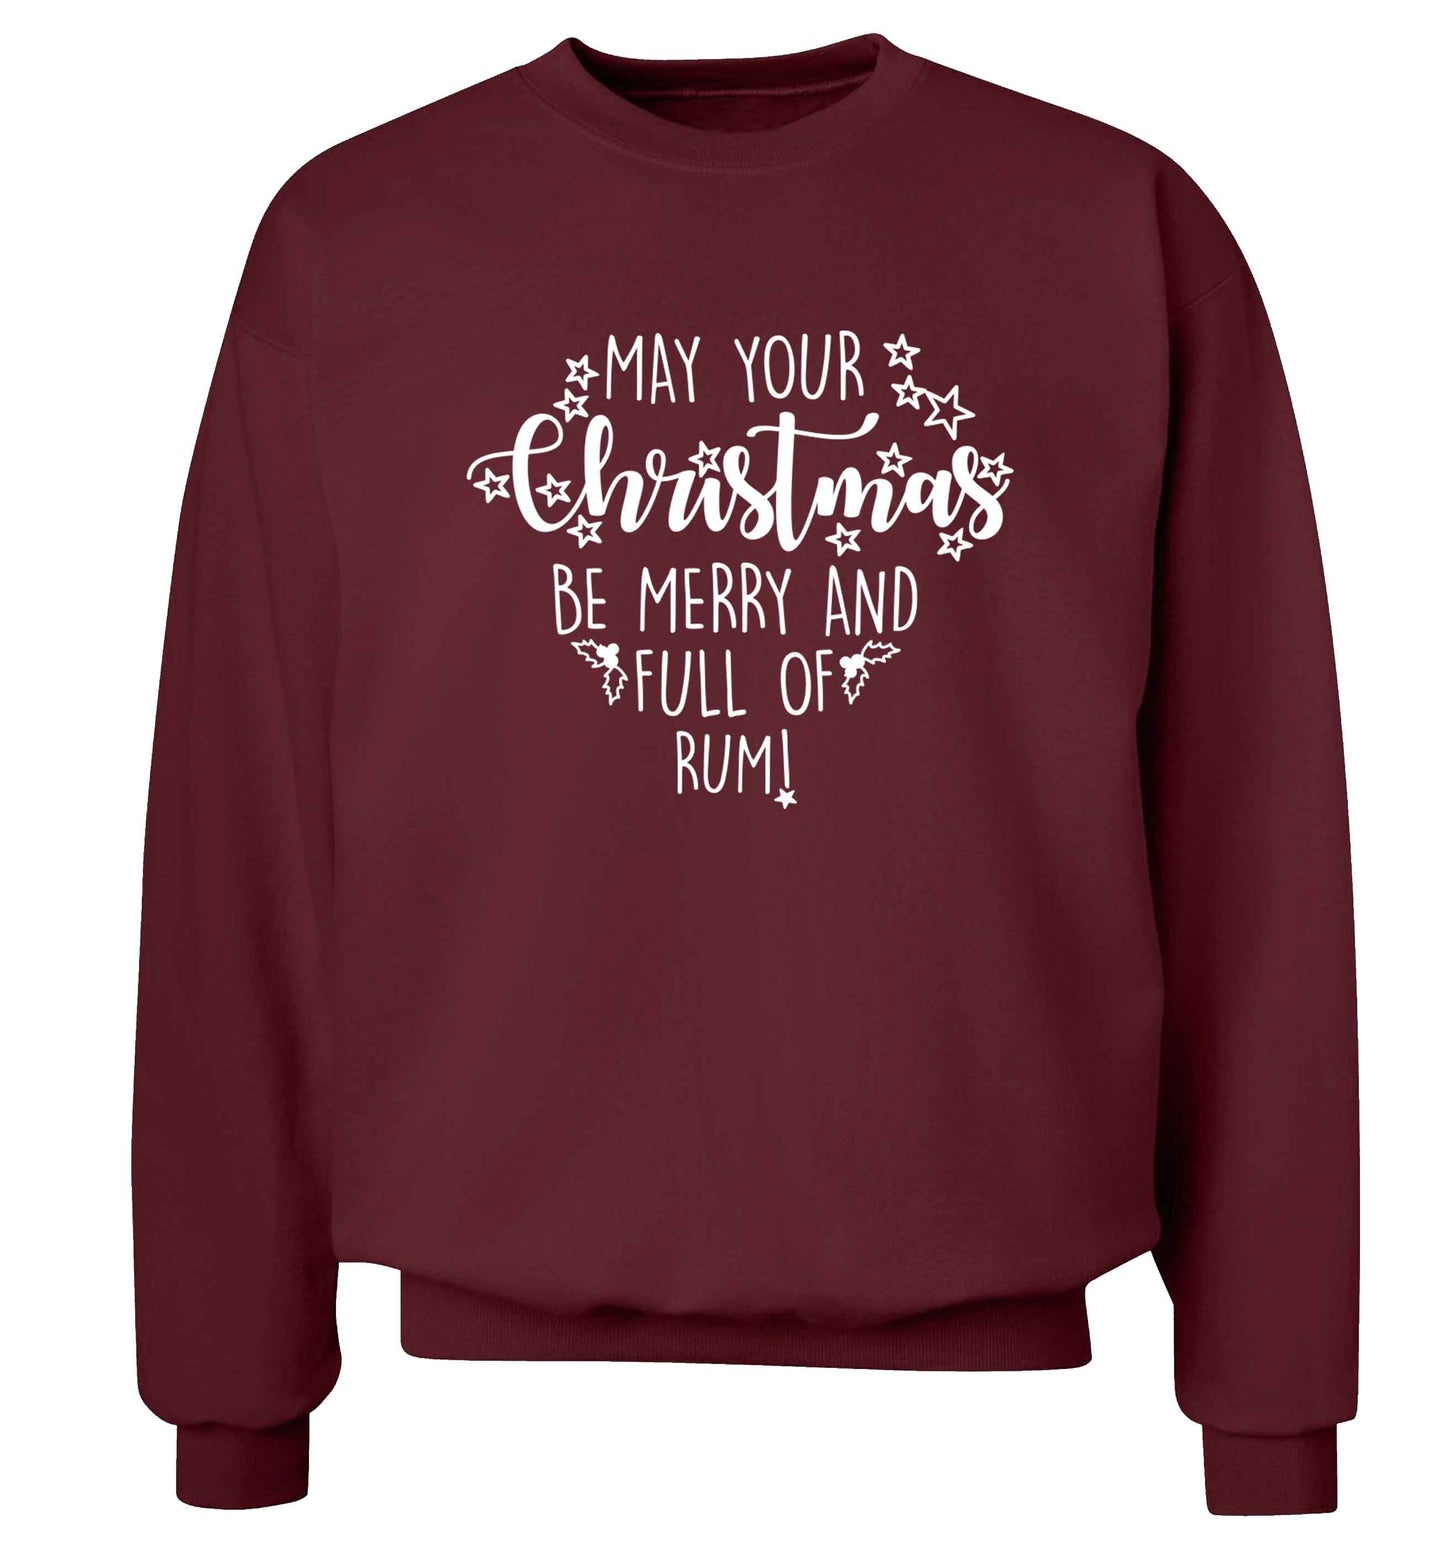 May your Christmas be merry and full of rum Adult's unisex maroon Sweater 2XL